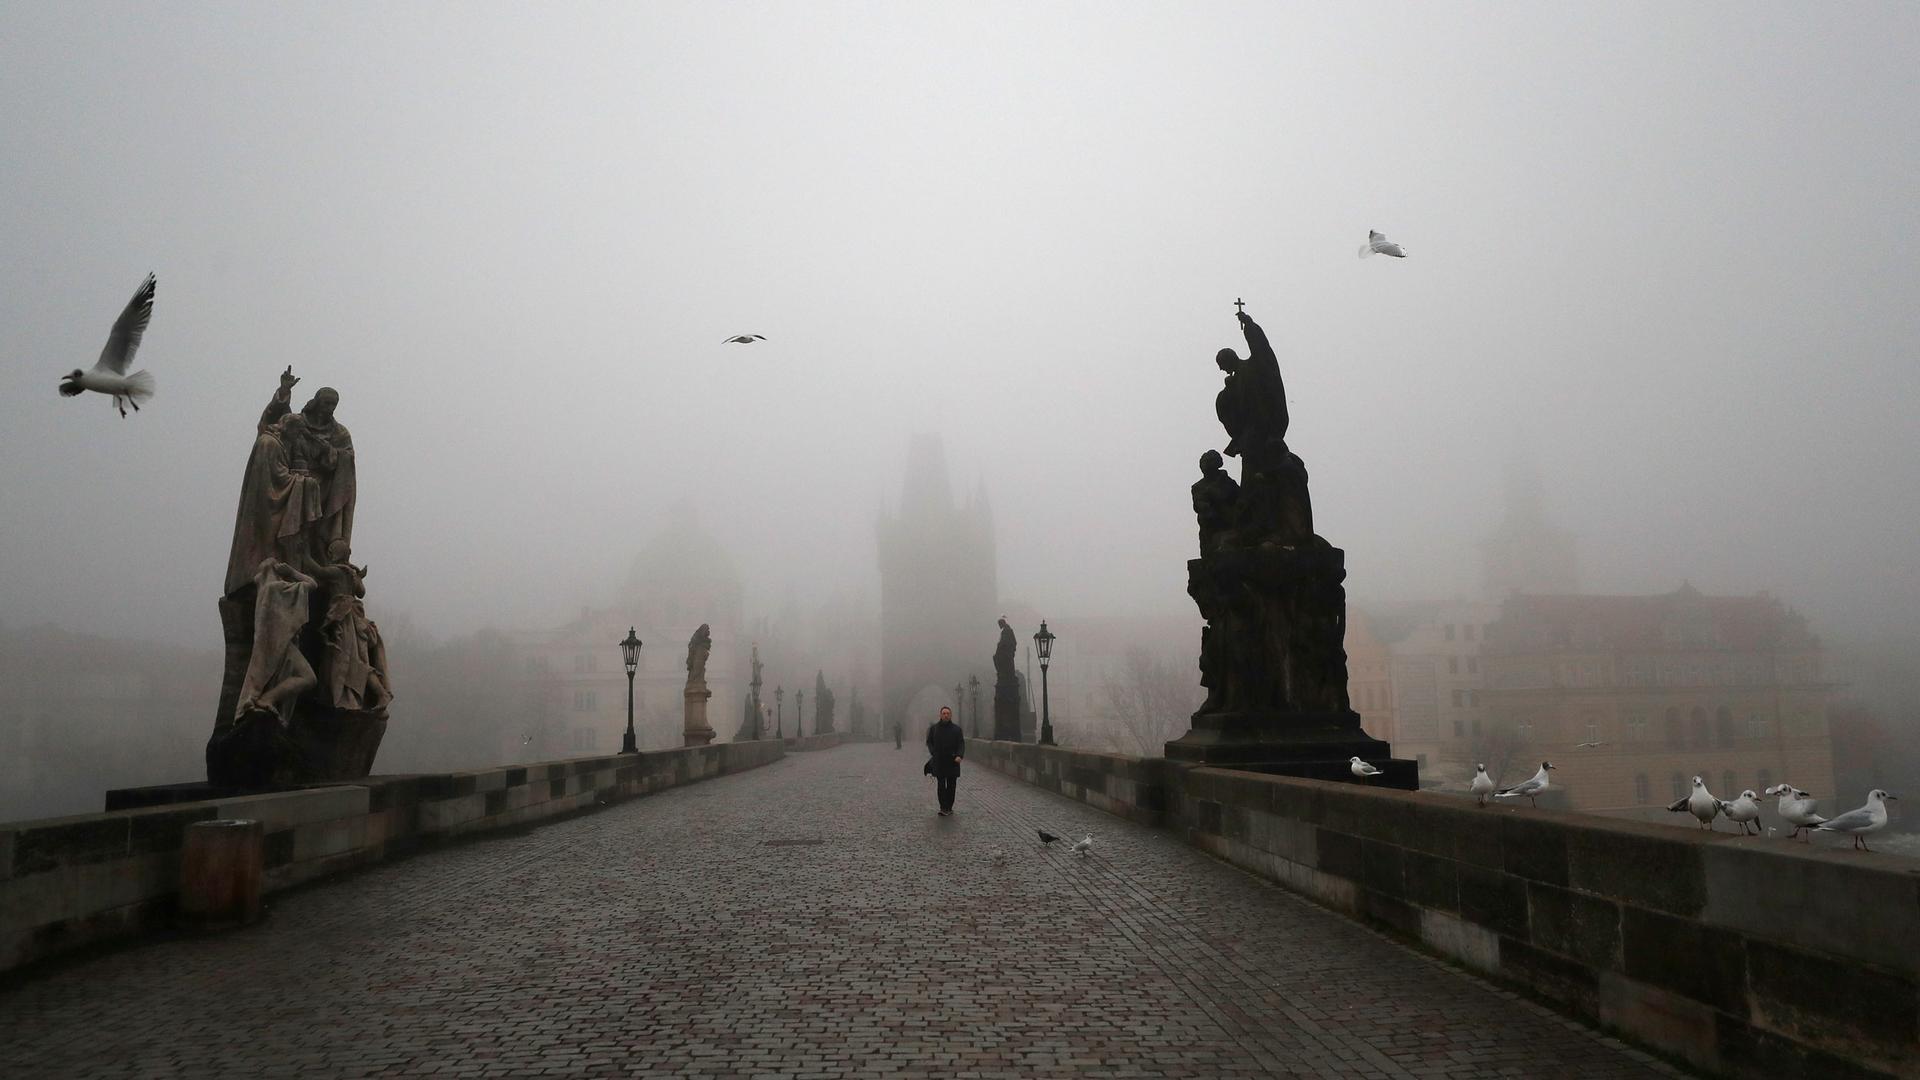 A cloudy, gray day is shown from one end of the Charles Bridge, with several stone statues on either side and a man walking in the distance.